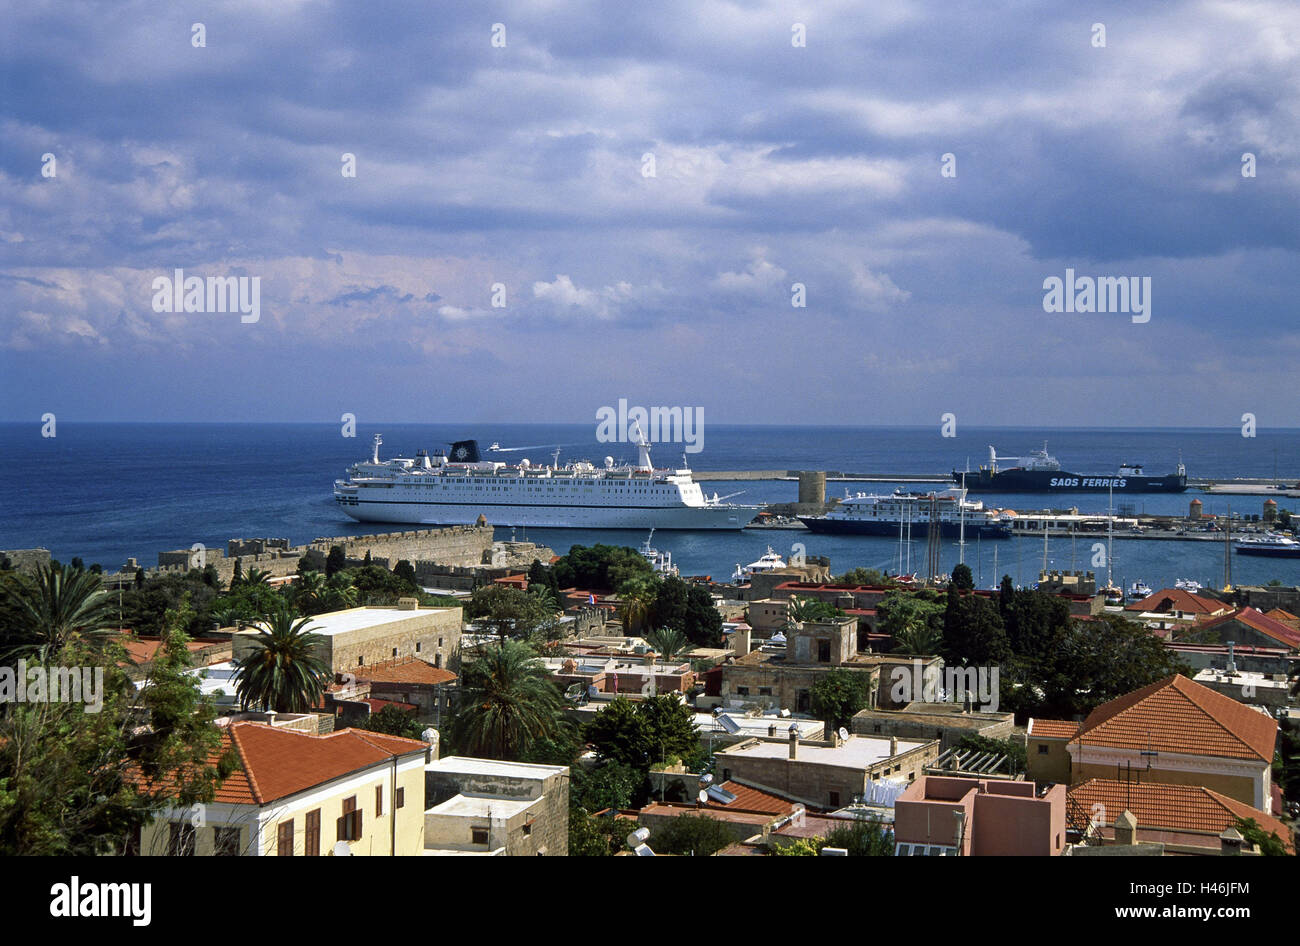 Greece, Dodekanes, island Rhodes, Rhodes town, town view, harbour, ships, town, island capital, destination, architecture, place of interest, culture, building, tourism, summer, sea, view, cruise ships, cruise, navigation, heaven, cloudies, Stock Photo